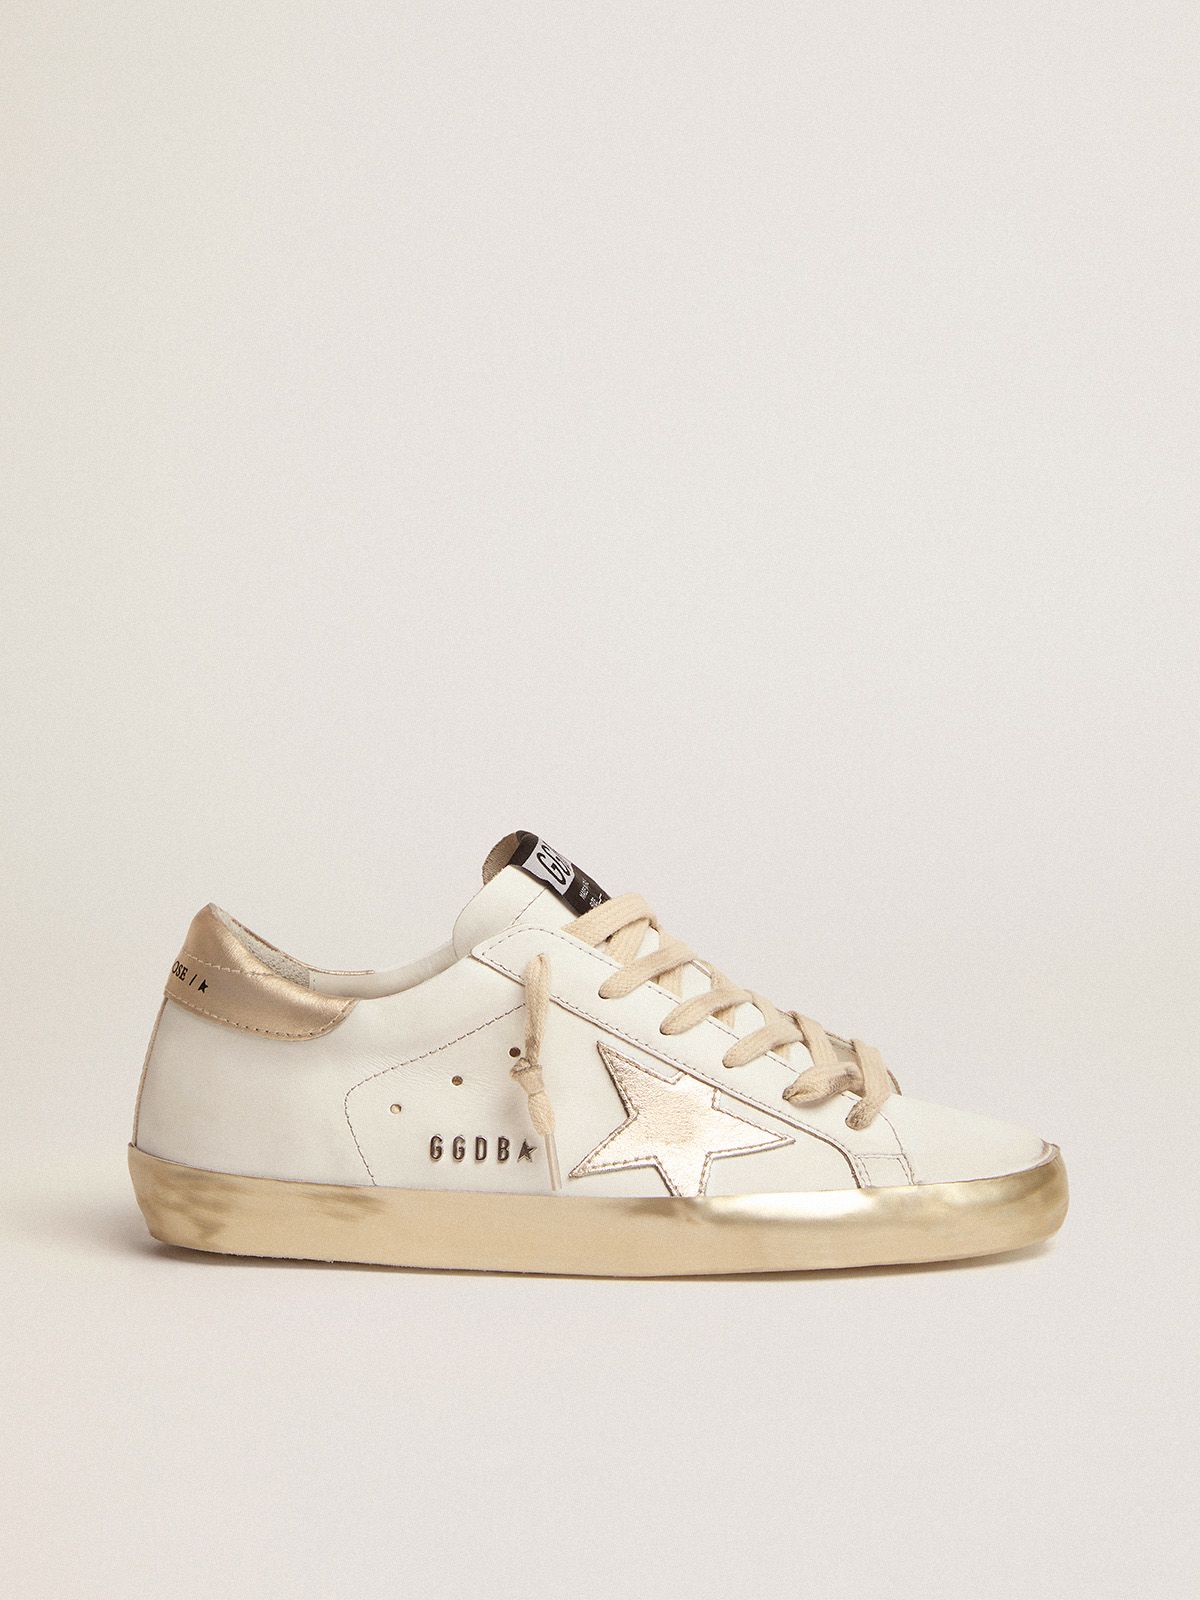 golden goose and foxing metal lettering Super-Star sparkle stud with gold sneakers